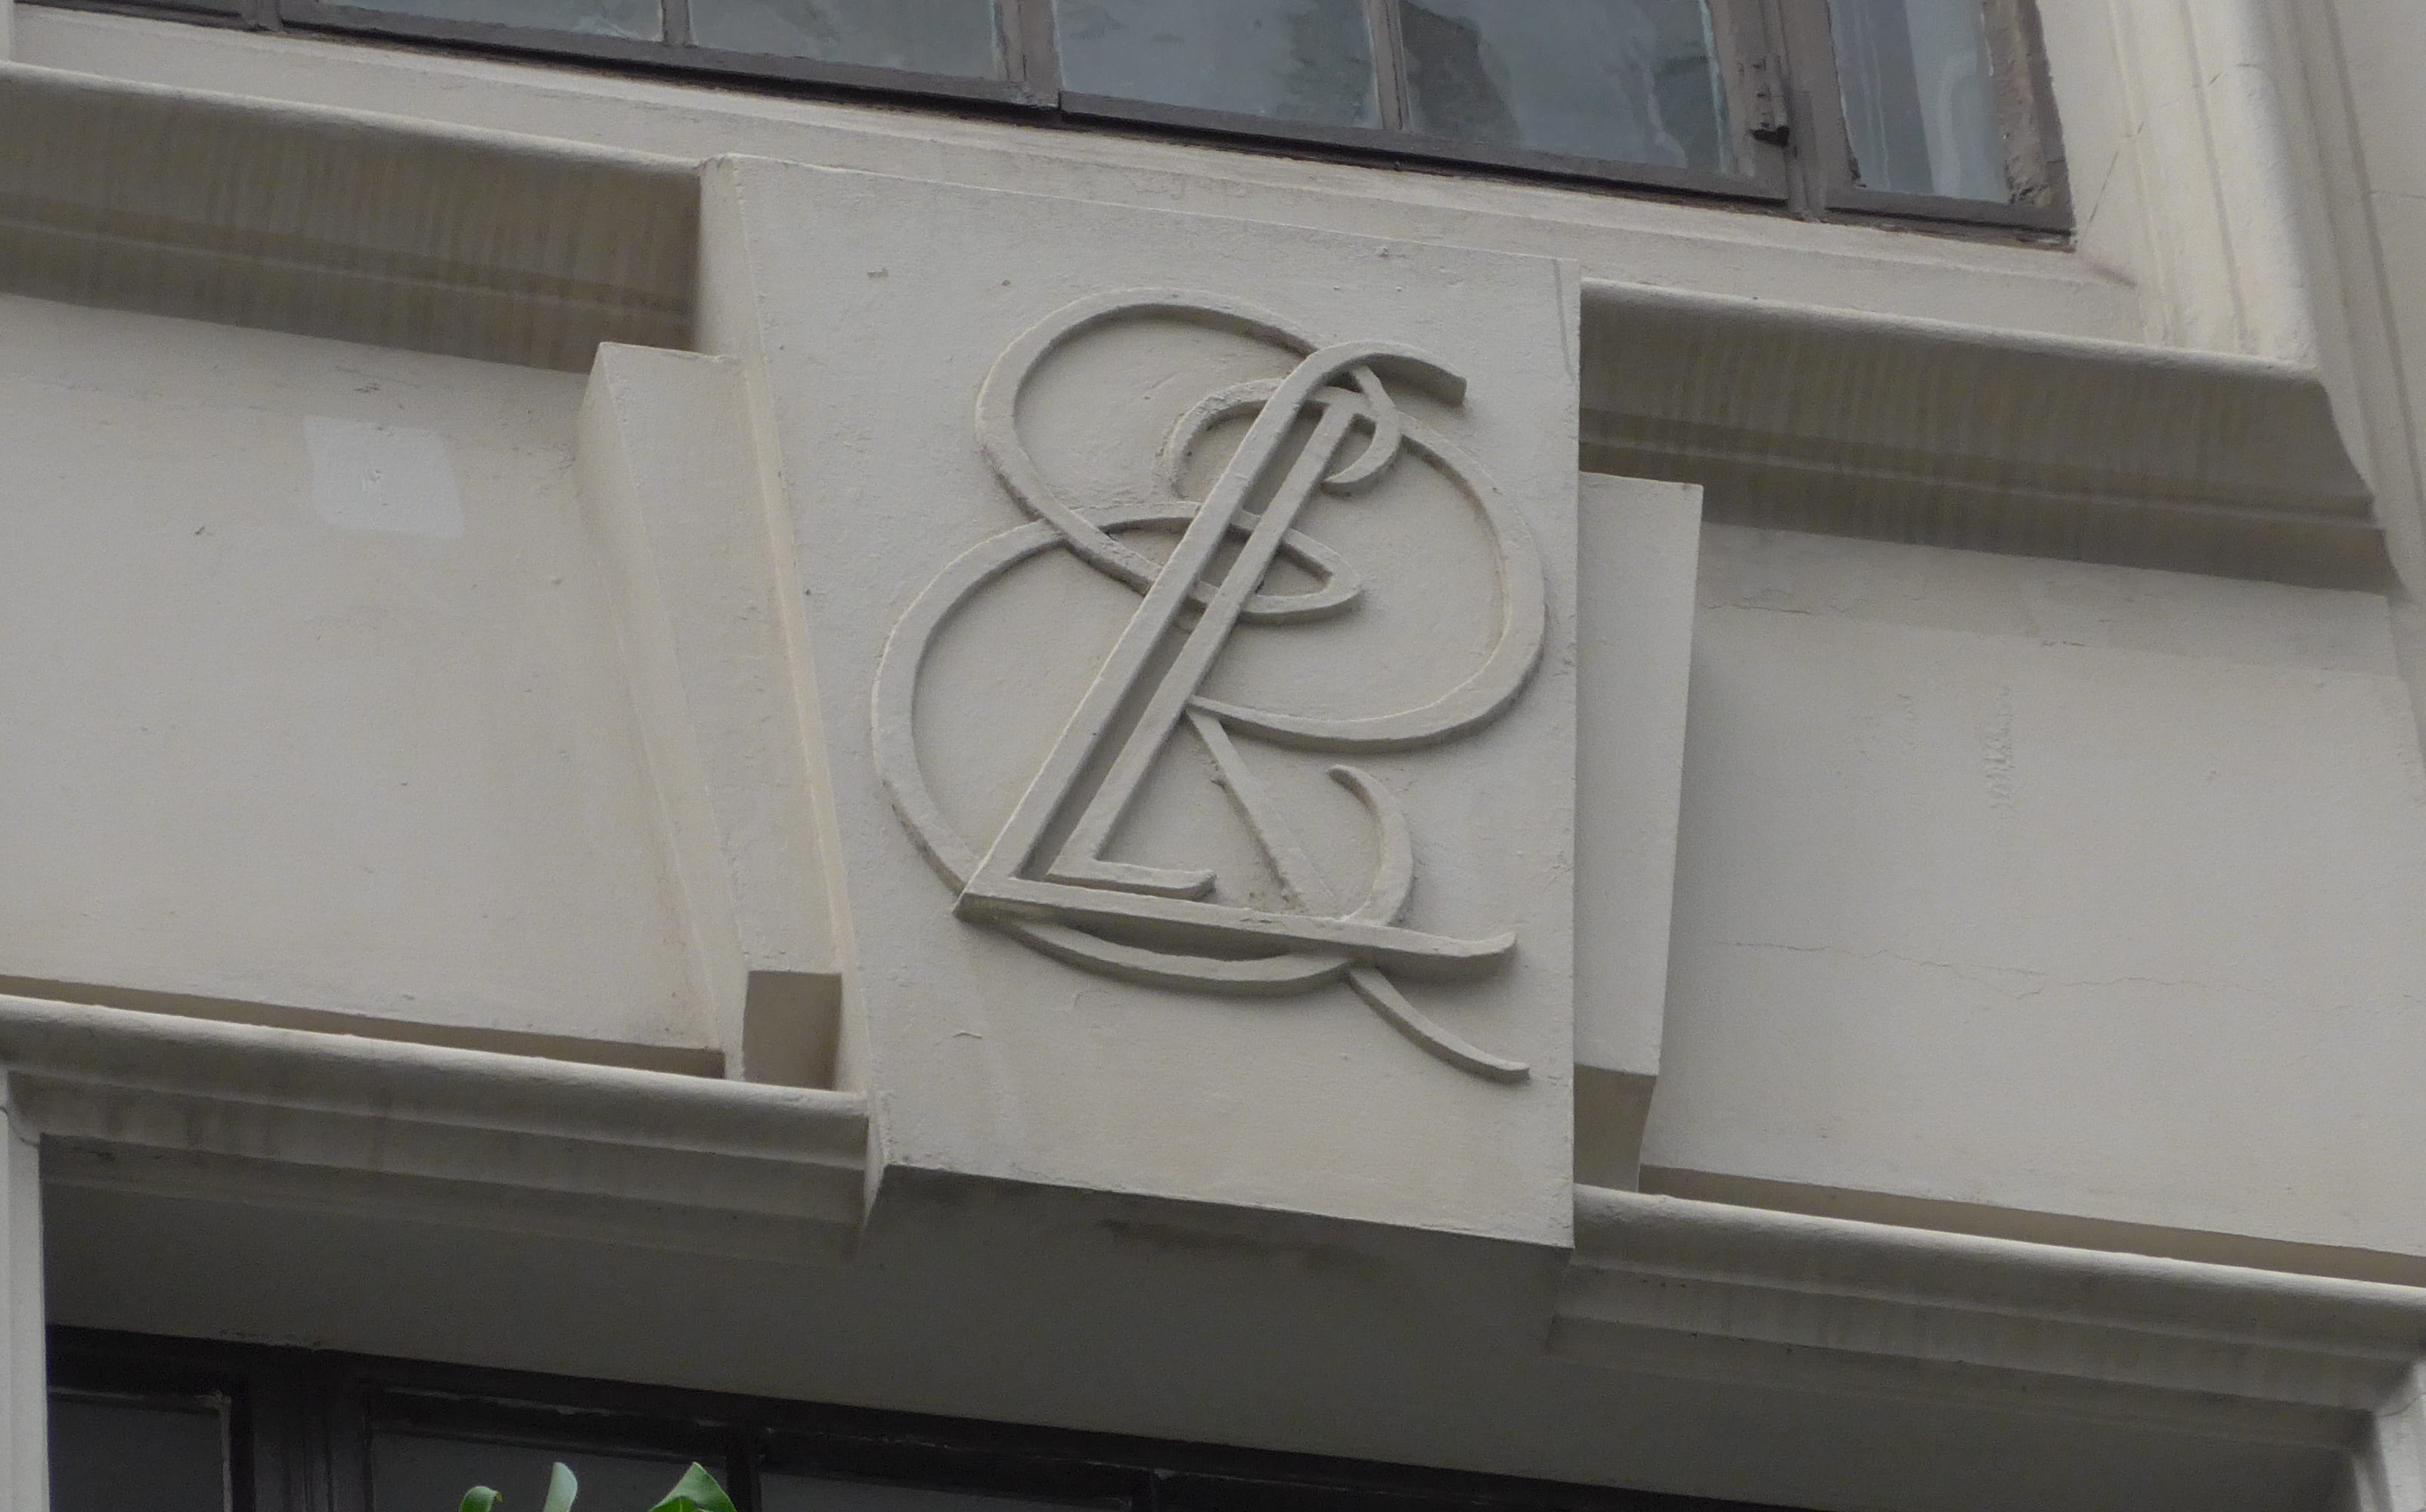 The Lewis Roberts Eady emblem on the old Lewis Eady Building in Queen St, Auckland